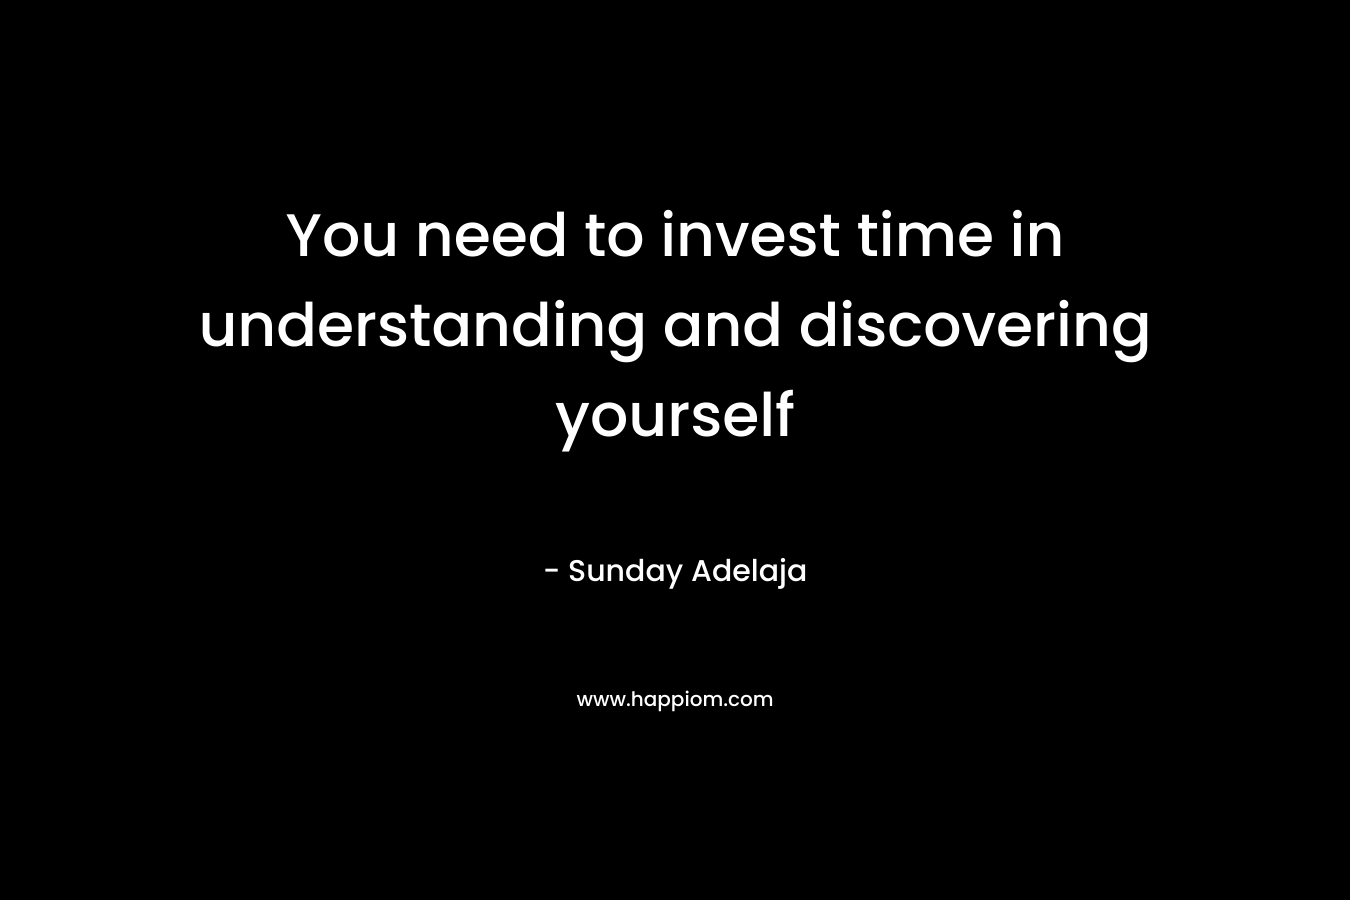 You need to invest time in understanding and discovering yourself